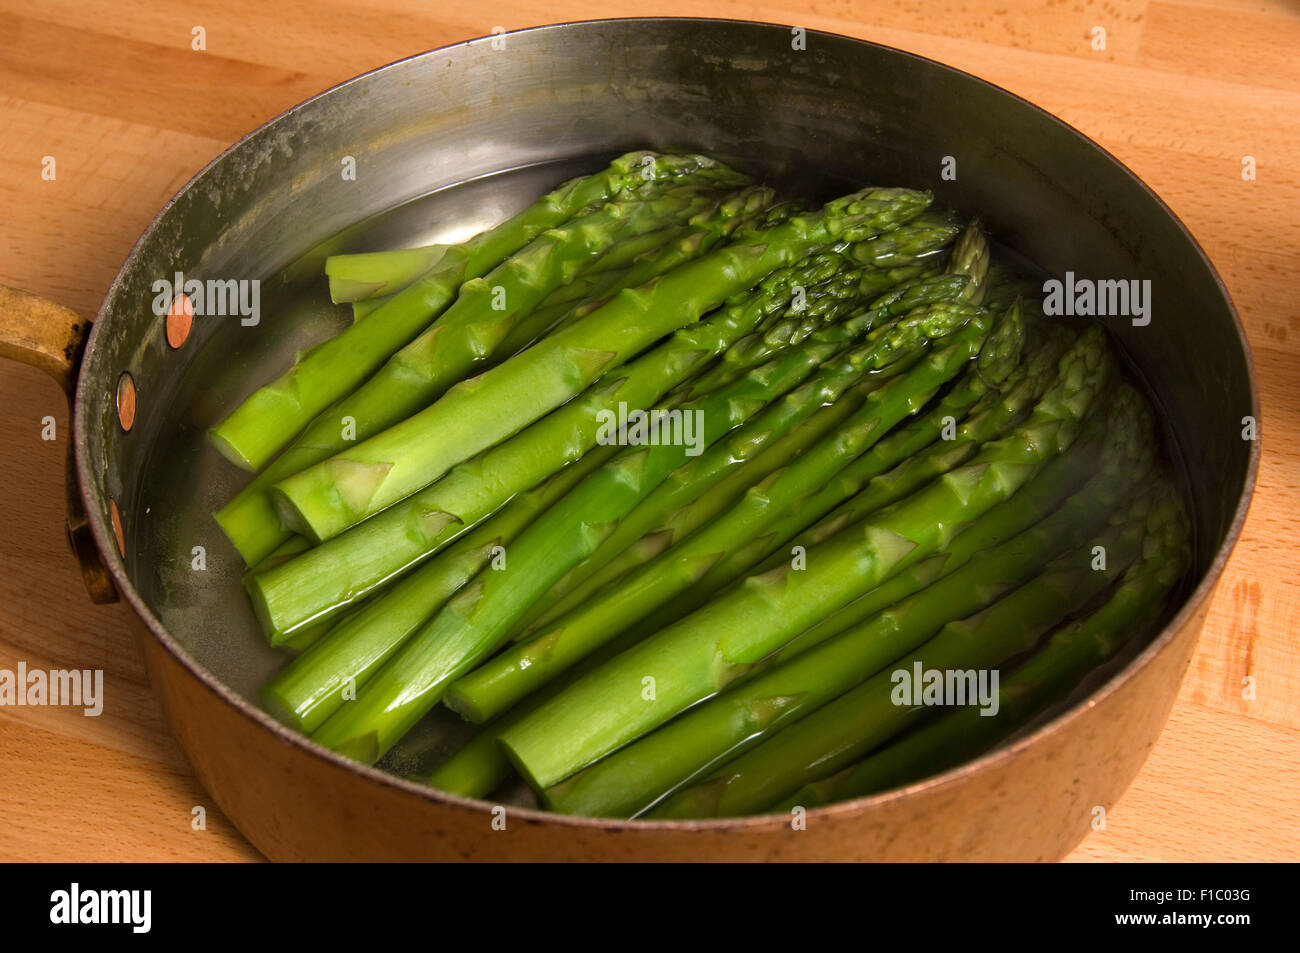 Asparagus boiled and served with butter. Stock Photo